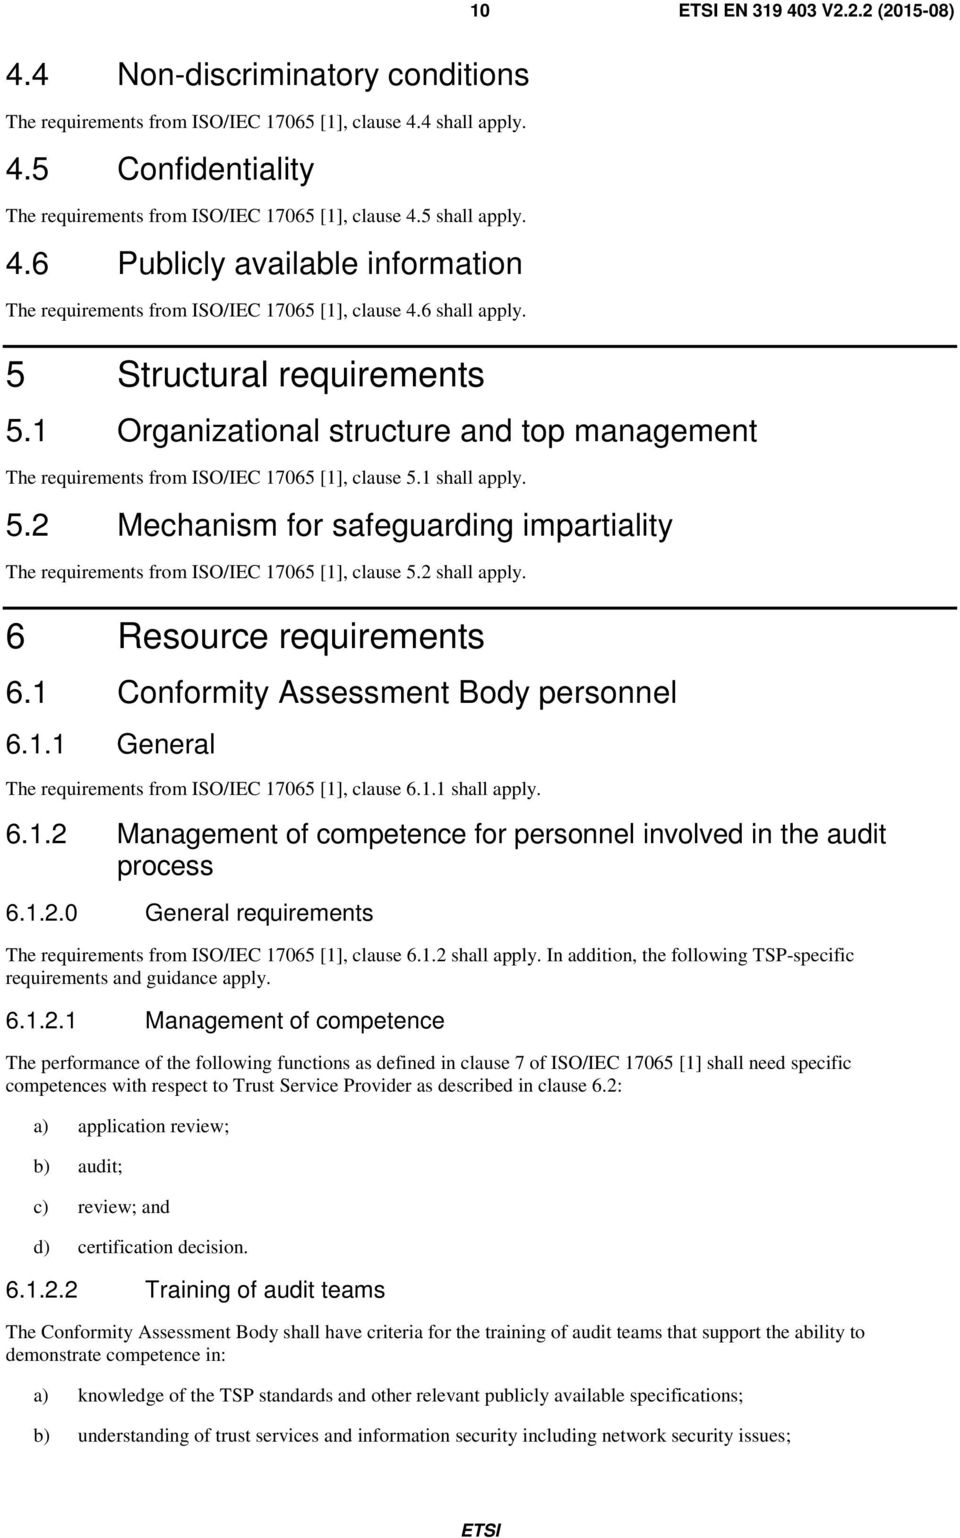 1 Organizational structure and top management The requirements from ISO/IEC 17065 [1], clause 5.1 shall apply. 5.2 Mechanism for safeguarding impartiality The requirements from ISO/IEC 17065 [1], clause 5.